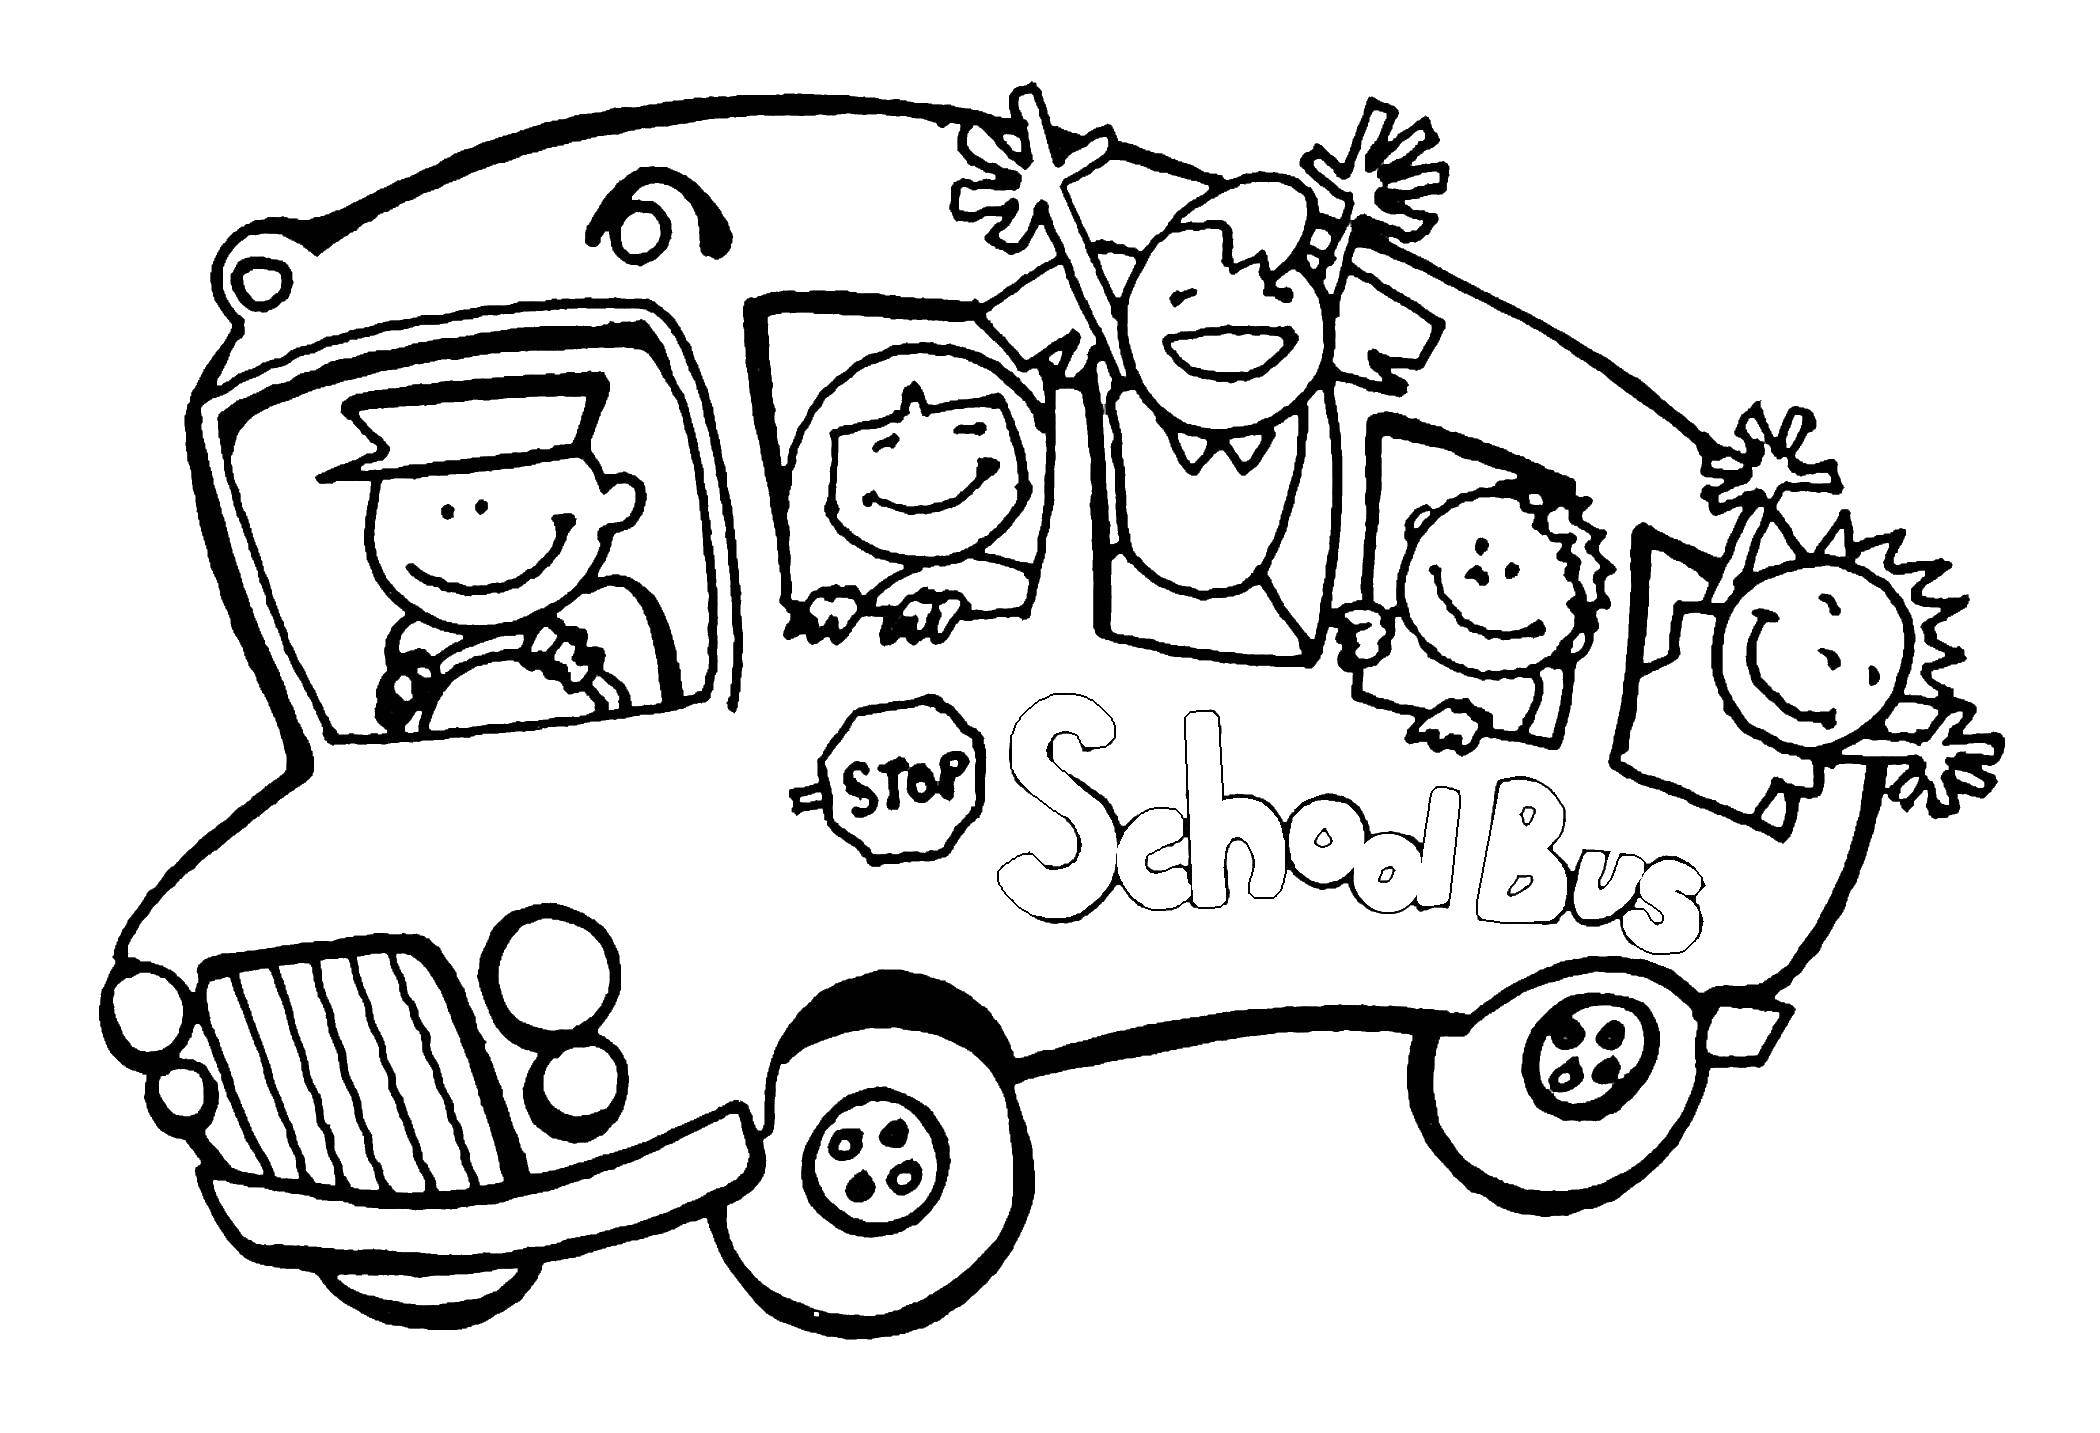 Coloring Children on the school bus. Category school. Tags:  school, school bus, children.